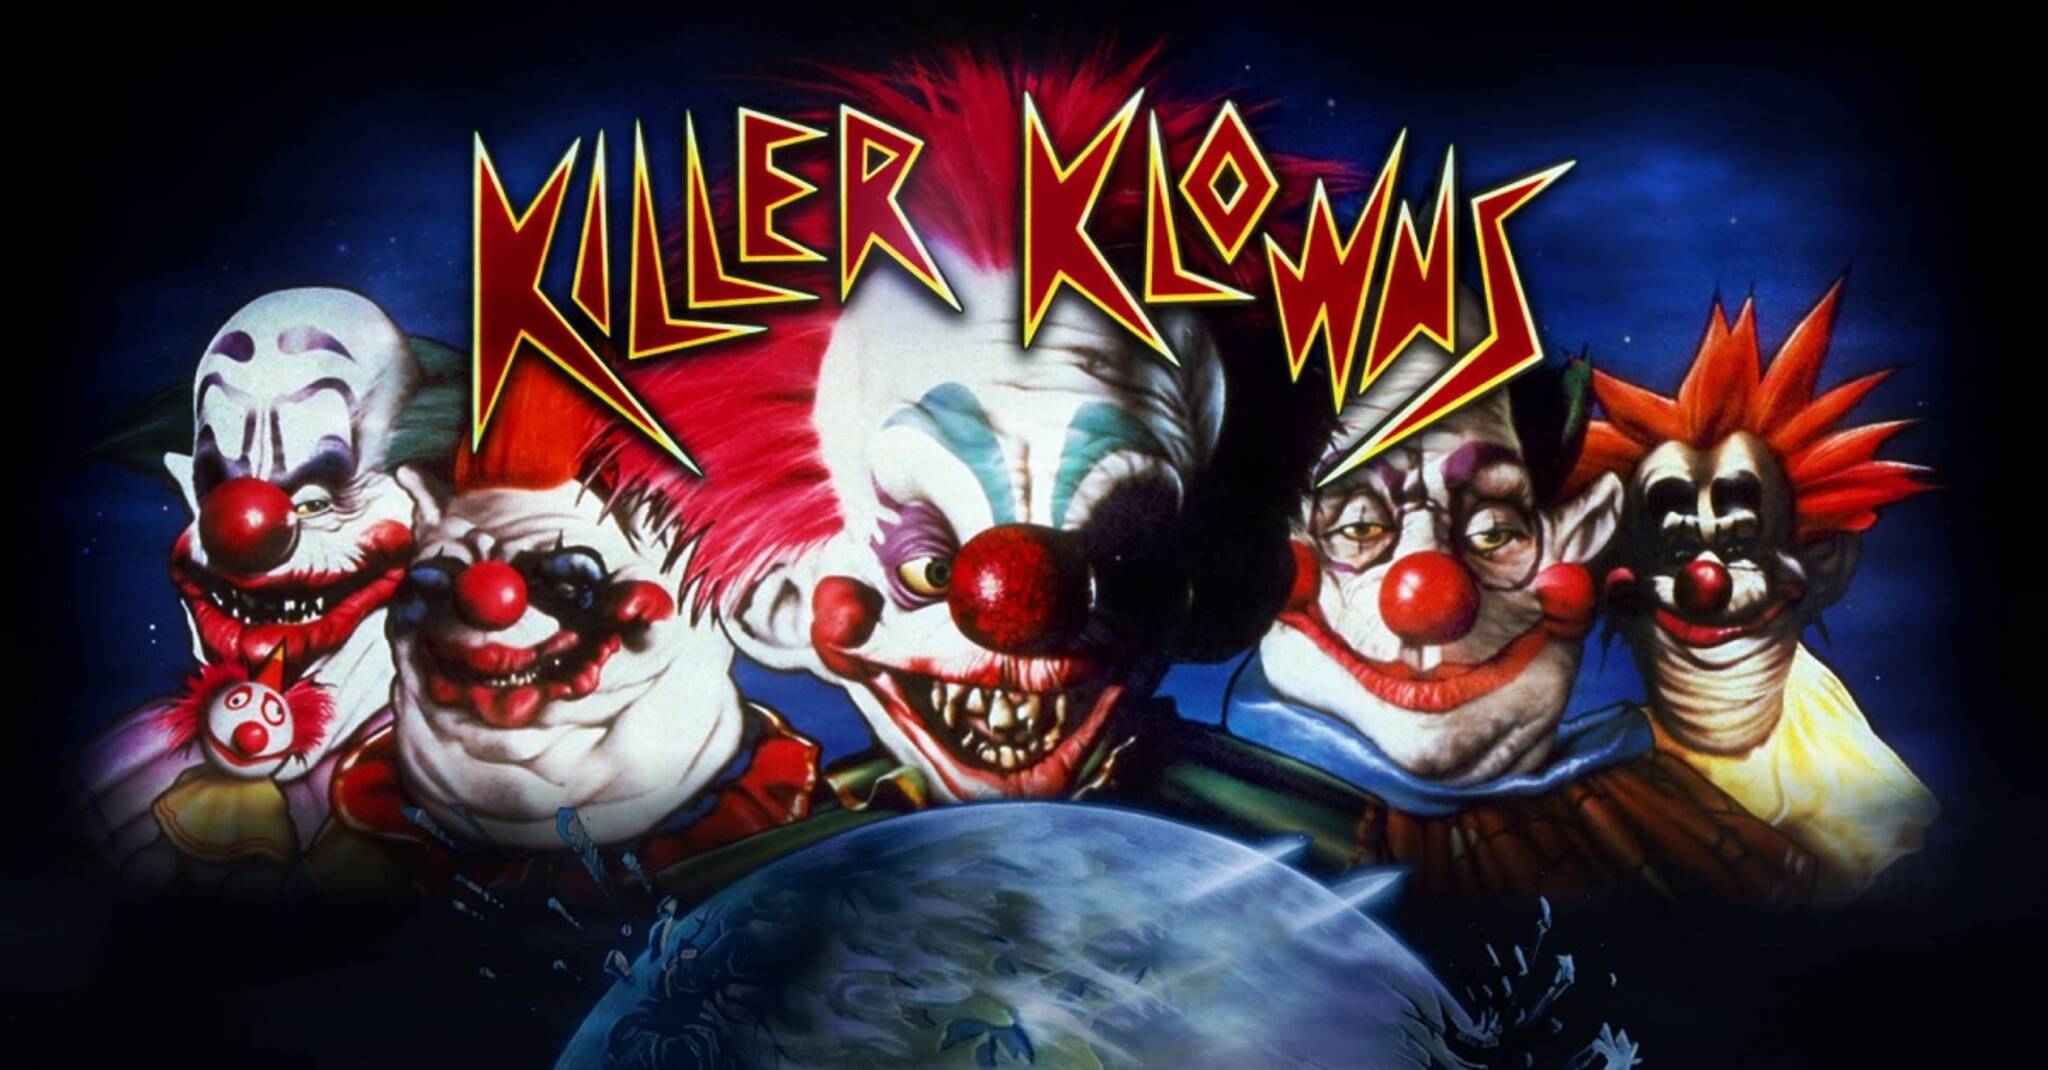 Killer from outer space. Клоуны-убийцы из космоса (1987). Клоуны-убийцы из космоса 1988. Killer Klowns from Outer Space 1988.